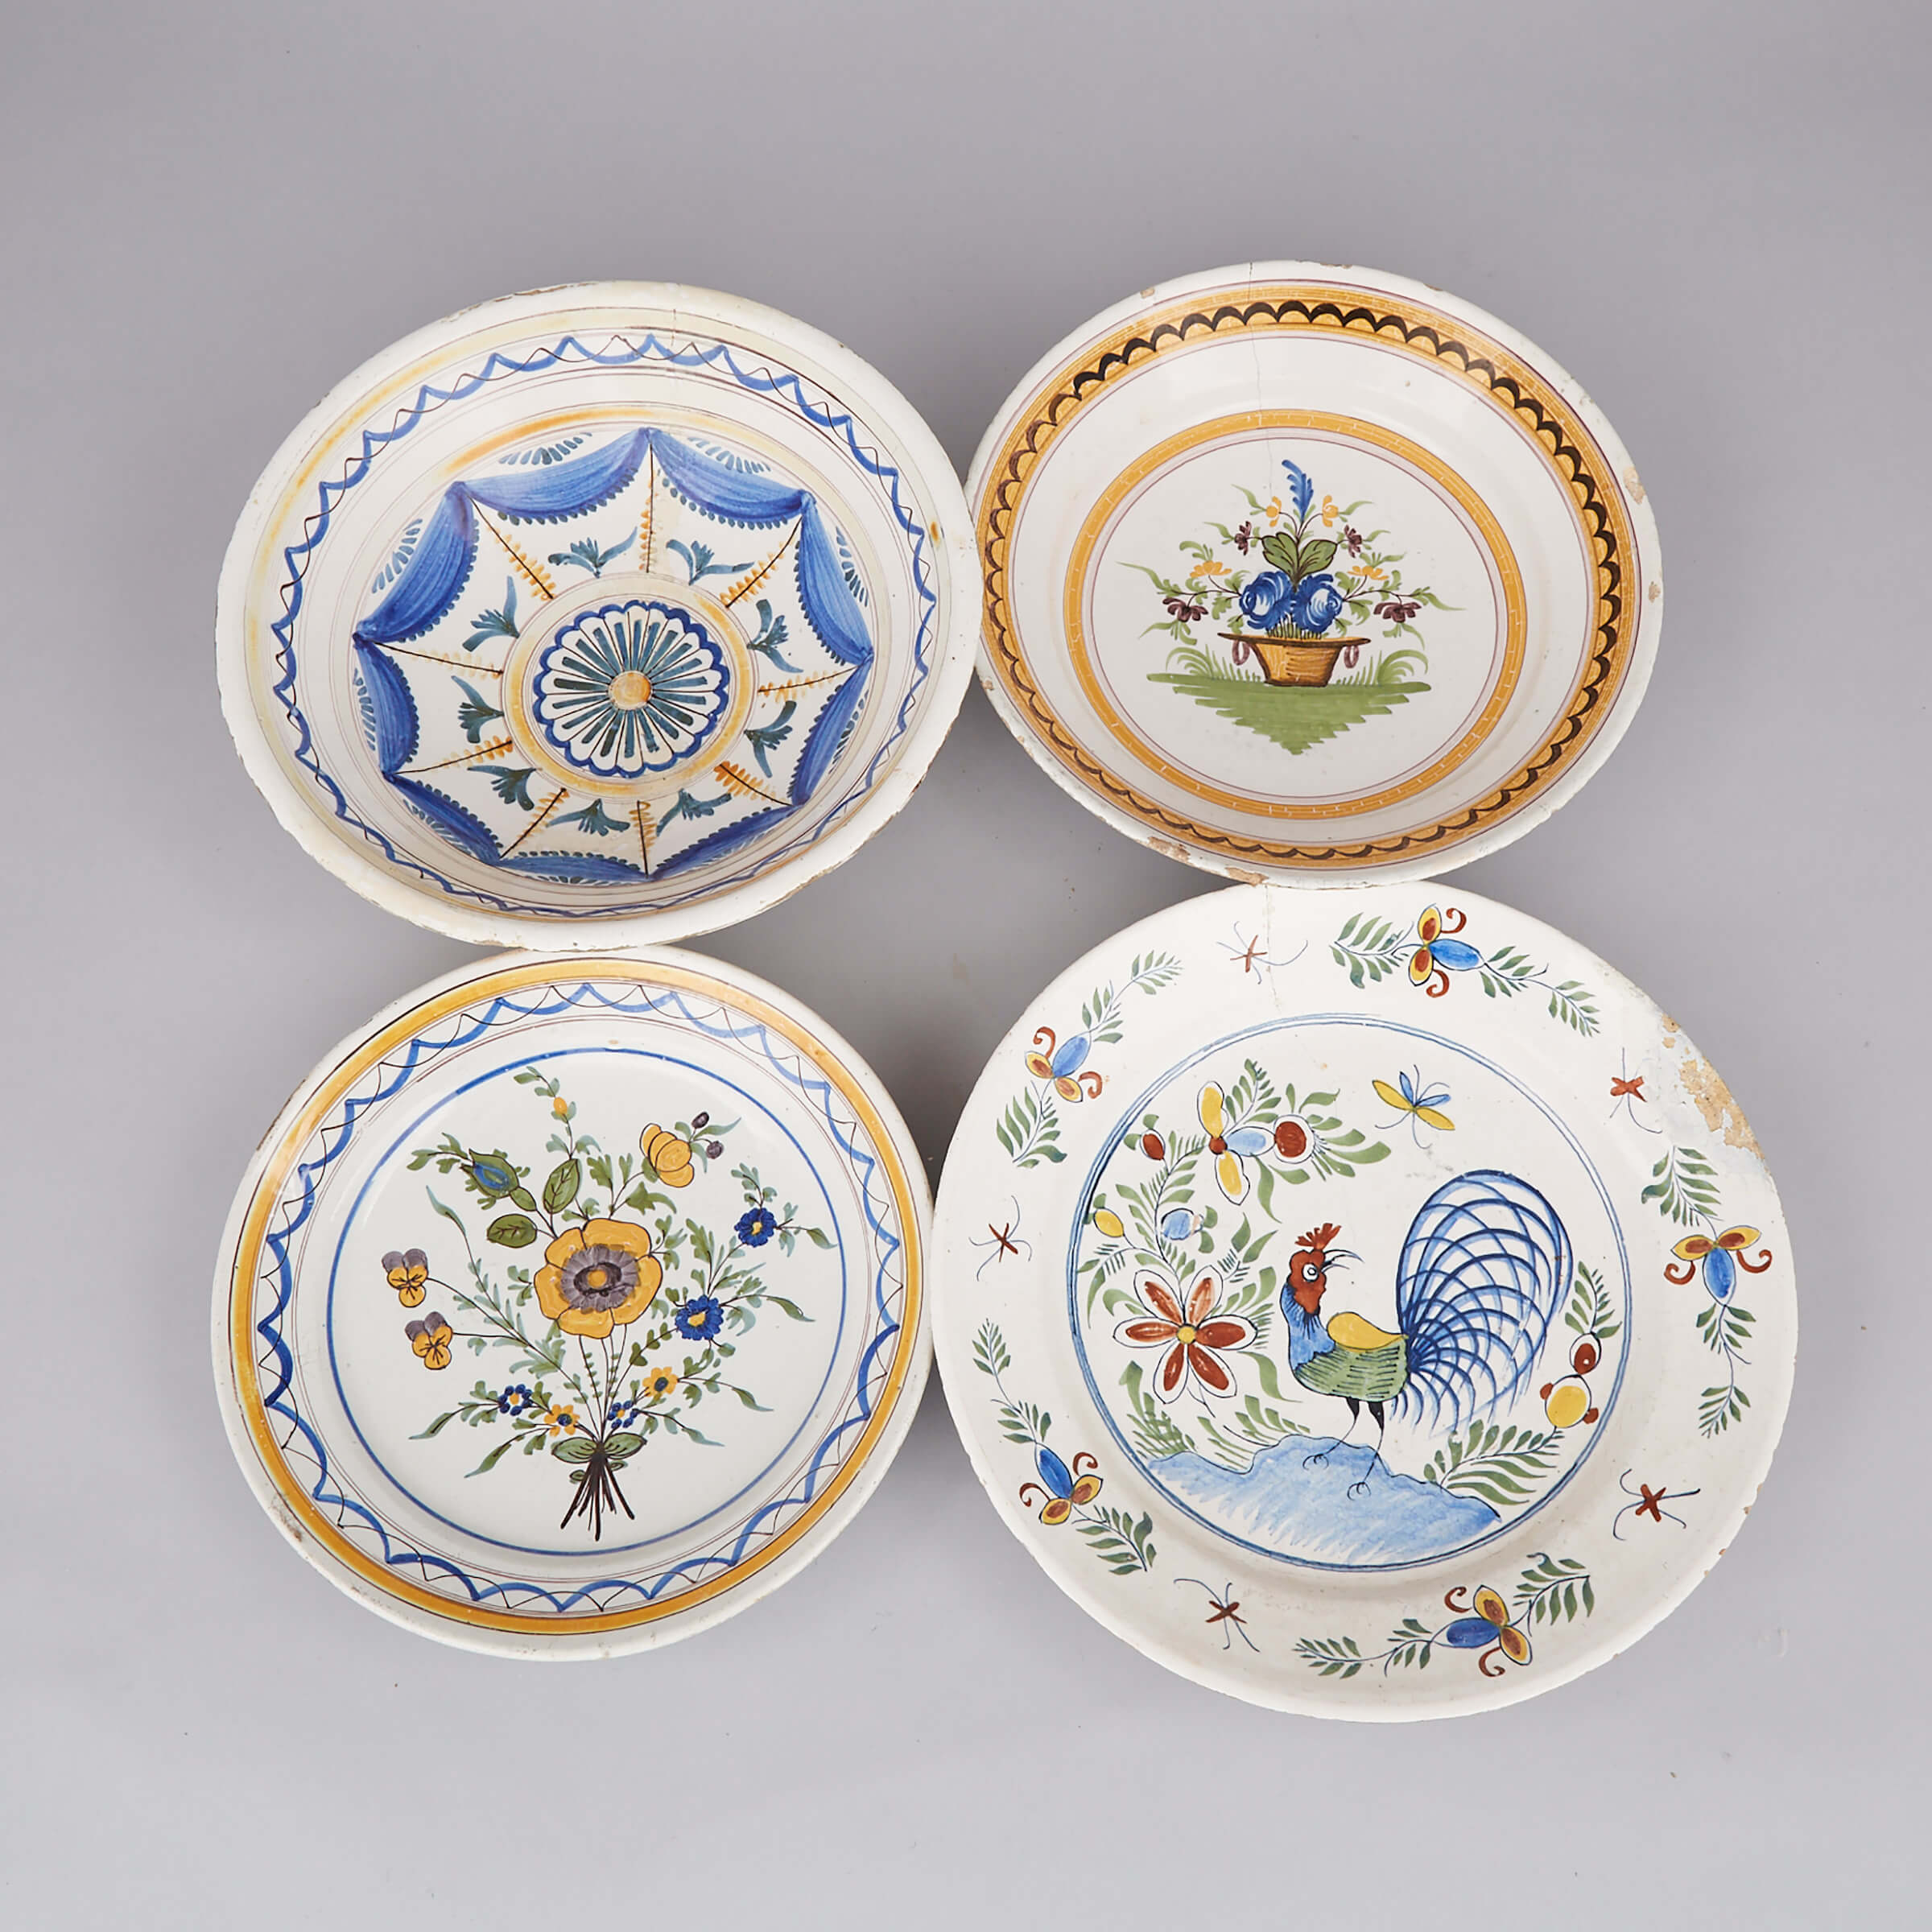 Two French Faience Polychrome  Painted Chargers and Two Bowls, 19th century